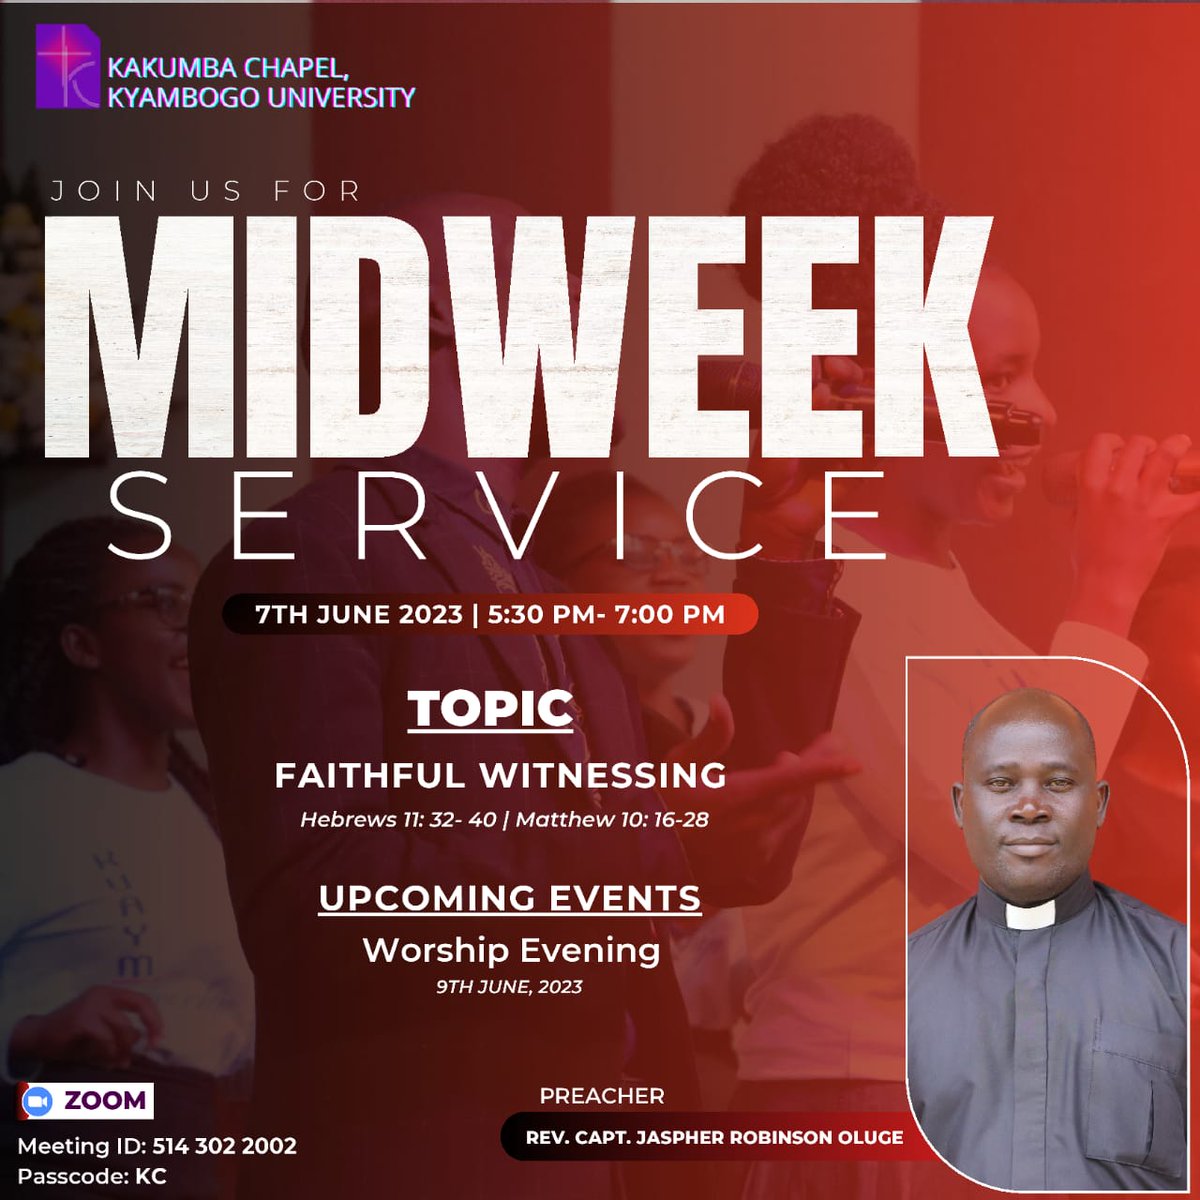 MIDWEEK SERVICE TODAY Join us at _5:30pm_ Physically at chapel and online via Zoom. Preacher: Rev Captain Jaspher Robinson Oluge Topic: Faithful Witnessing. Zoom link us02web.zoom.us/j/5143022002?p… Meeting ID: 514 302 2002 Passcode: KC